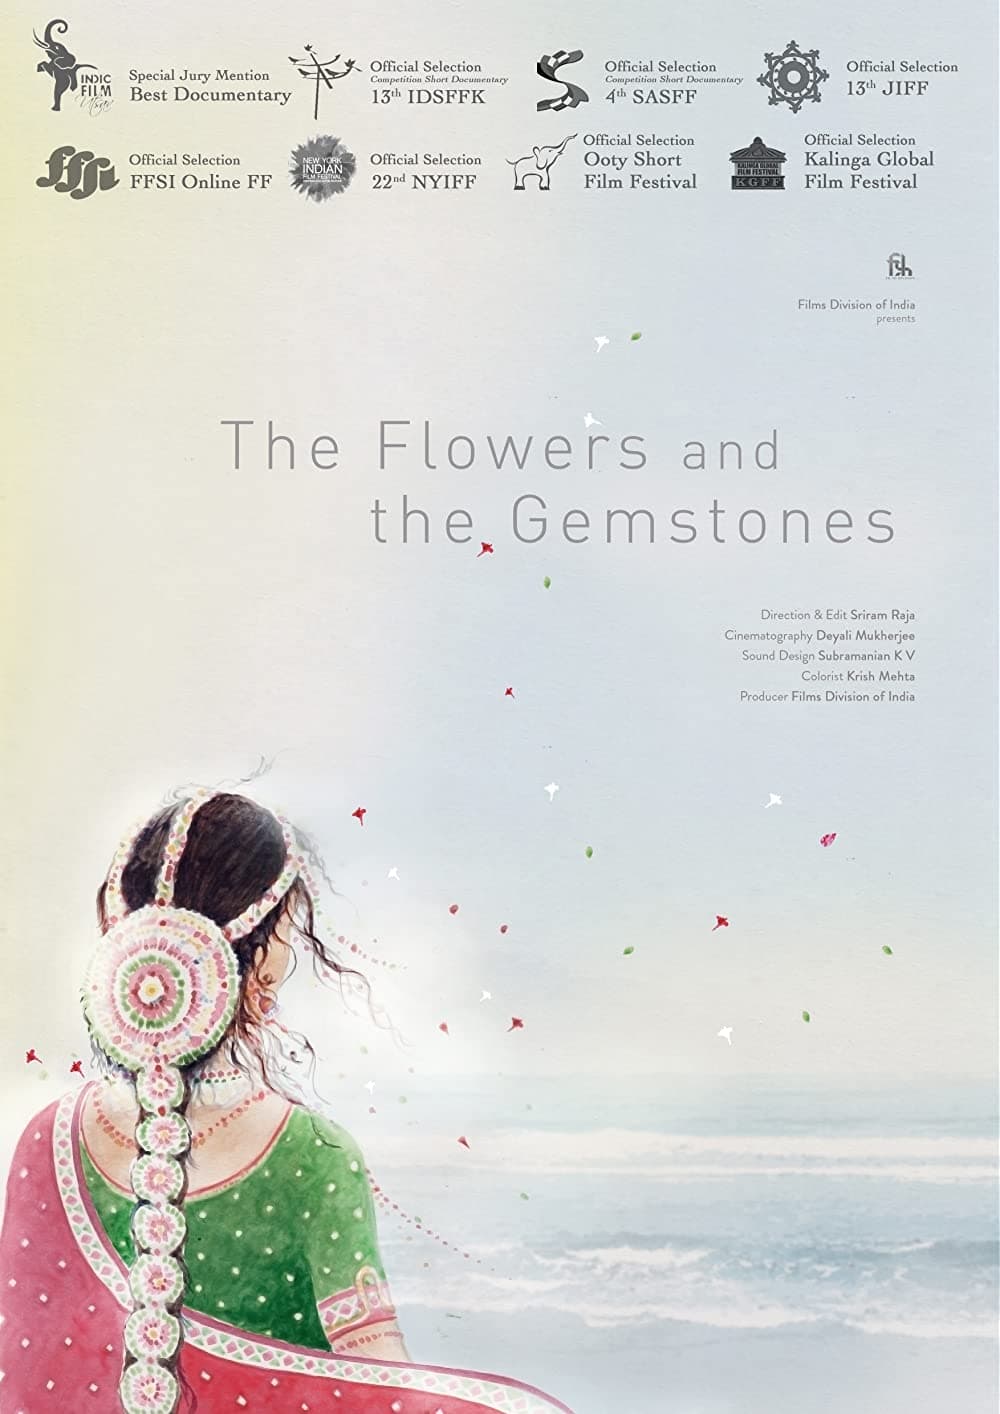 The Flowers and the Gemstones